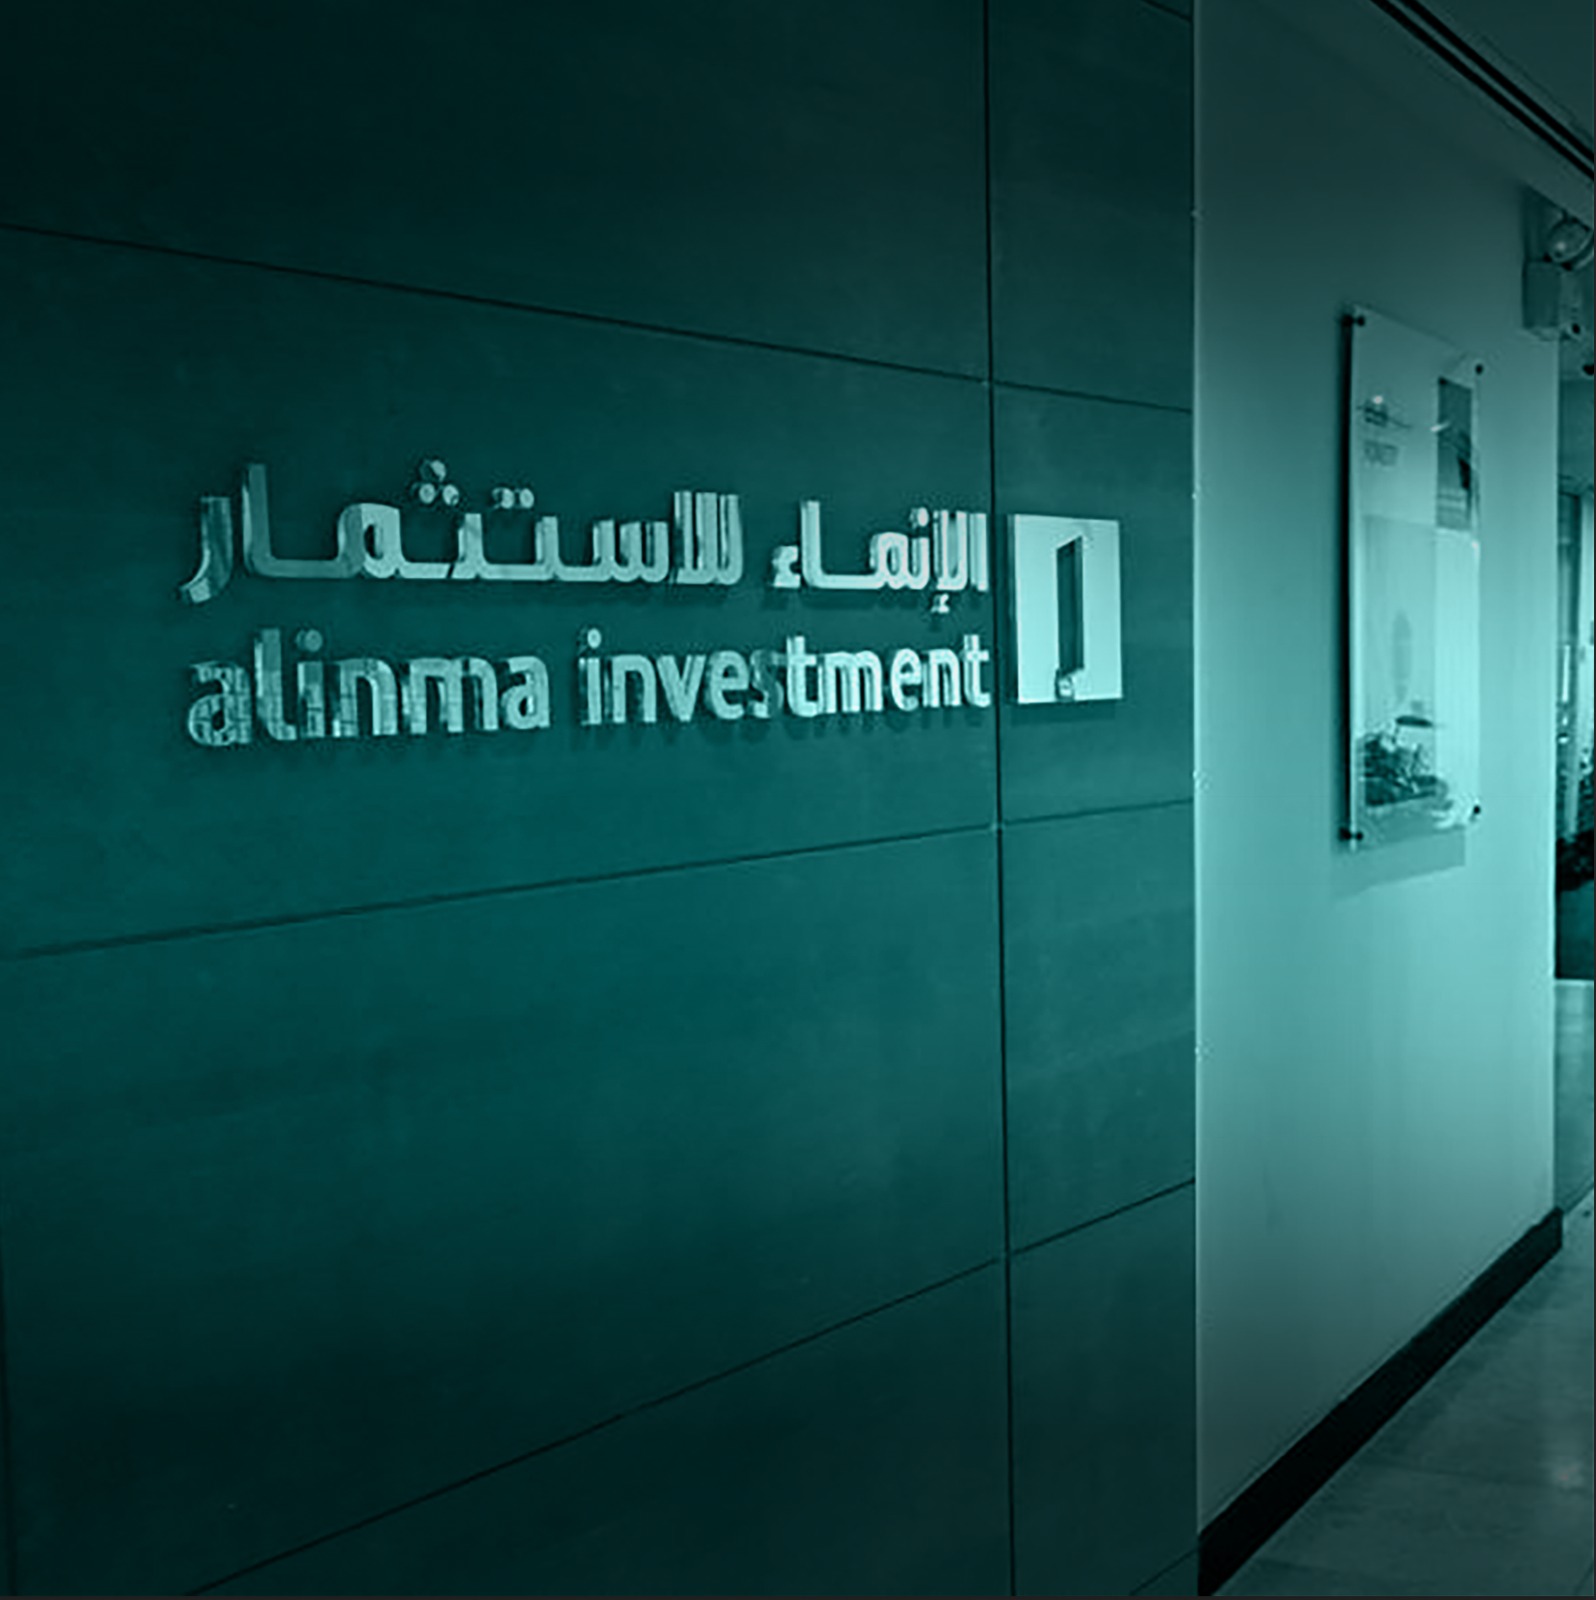 Semiannual reports of the assets of Alinma Hospitality REIT Fund